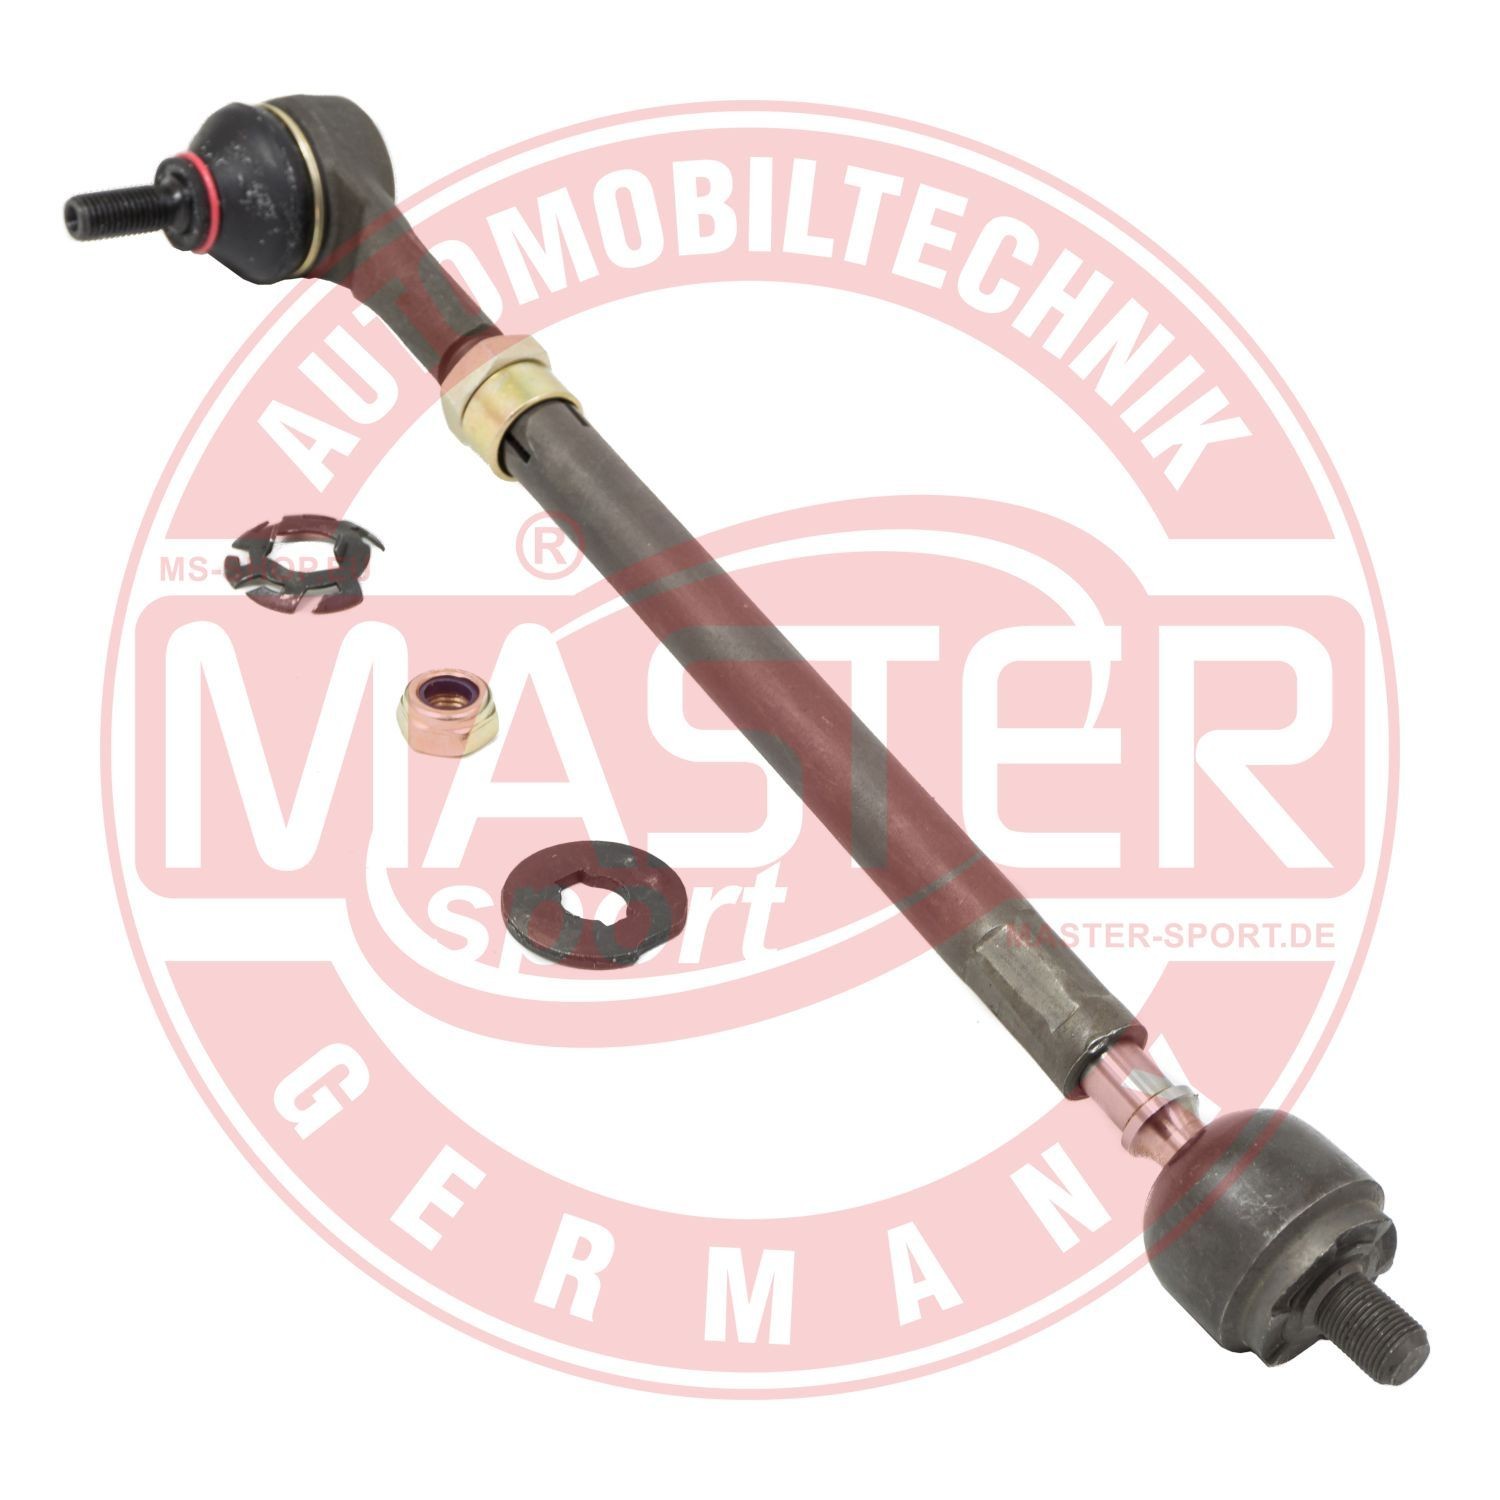 121811609 MASTER-SPORT Front Axle, M14x1,5, 226 mm, for vehicles with power steering, for vehicles without power steering, with nut Tie rod axle joint 18116/211-SET-MS buy